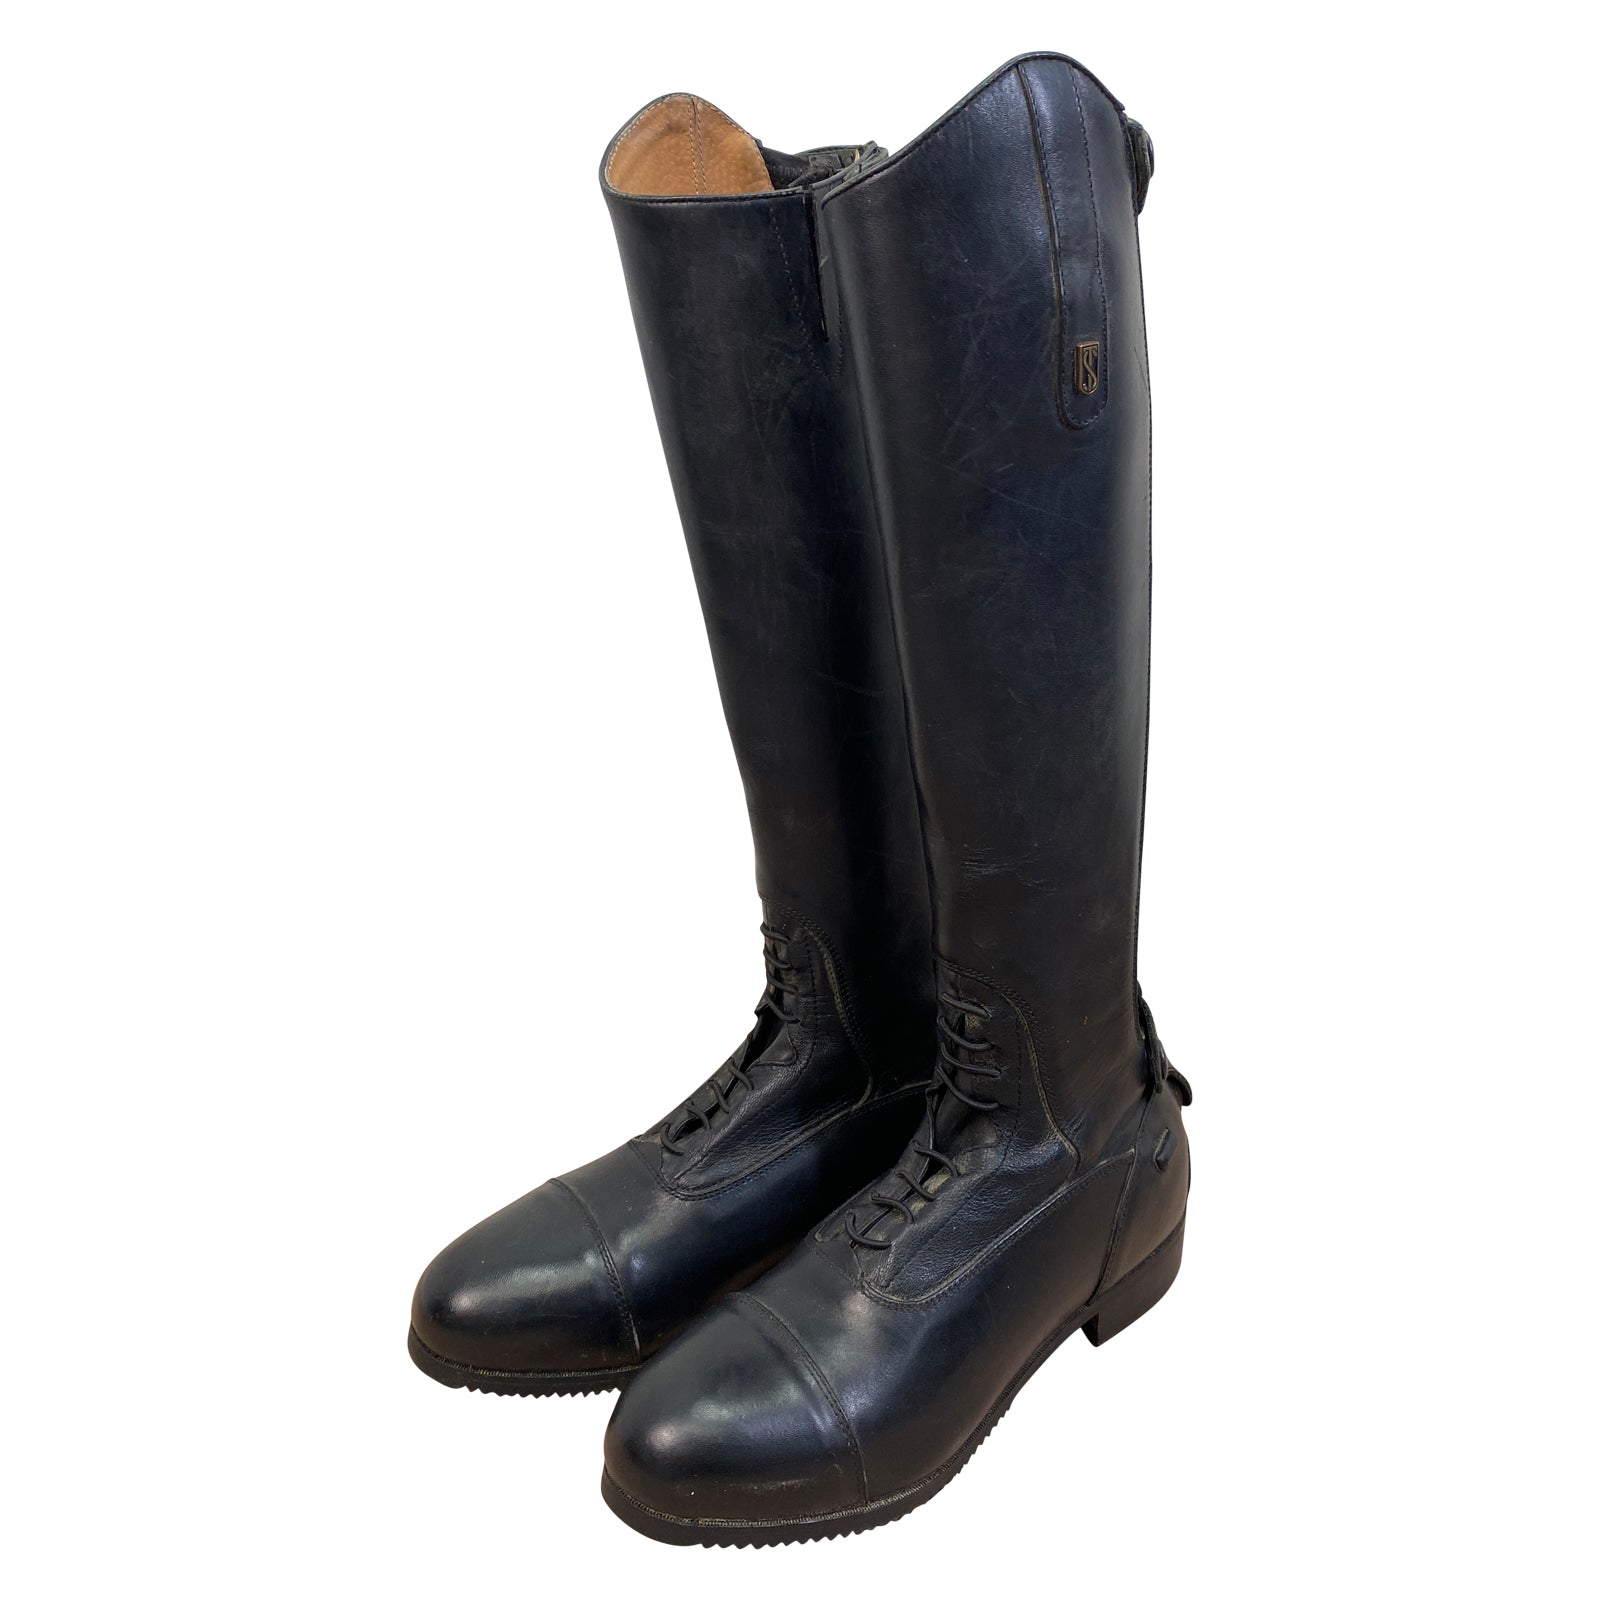 Front view of Tredstep Donatello II Junior Field Boots in Black